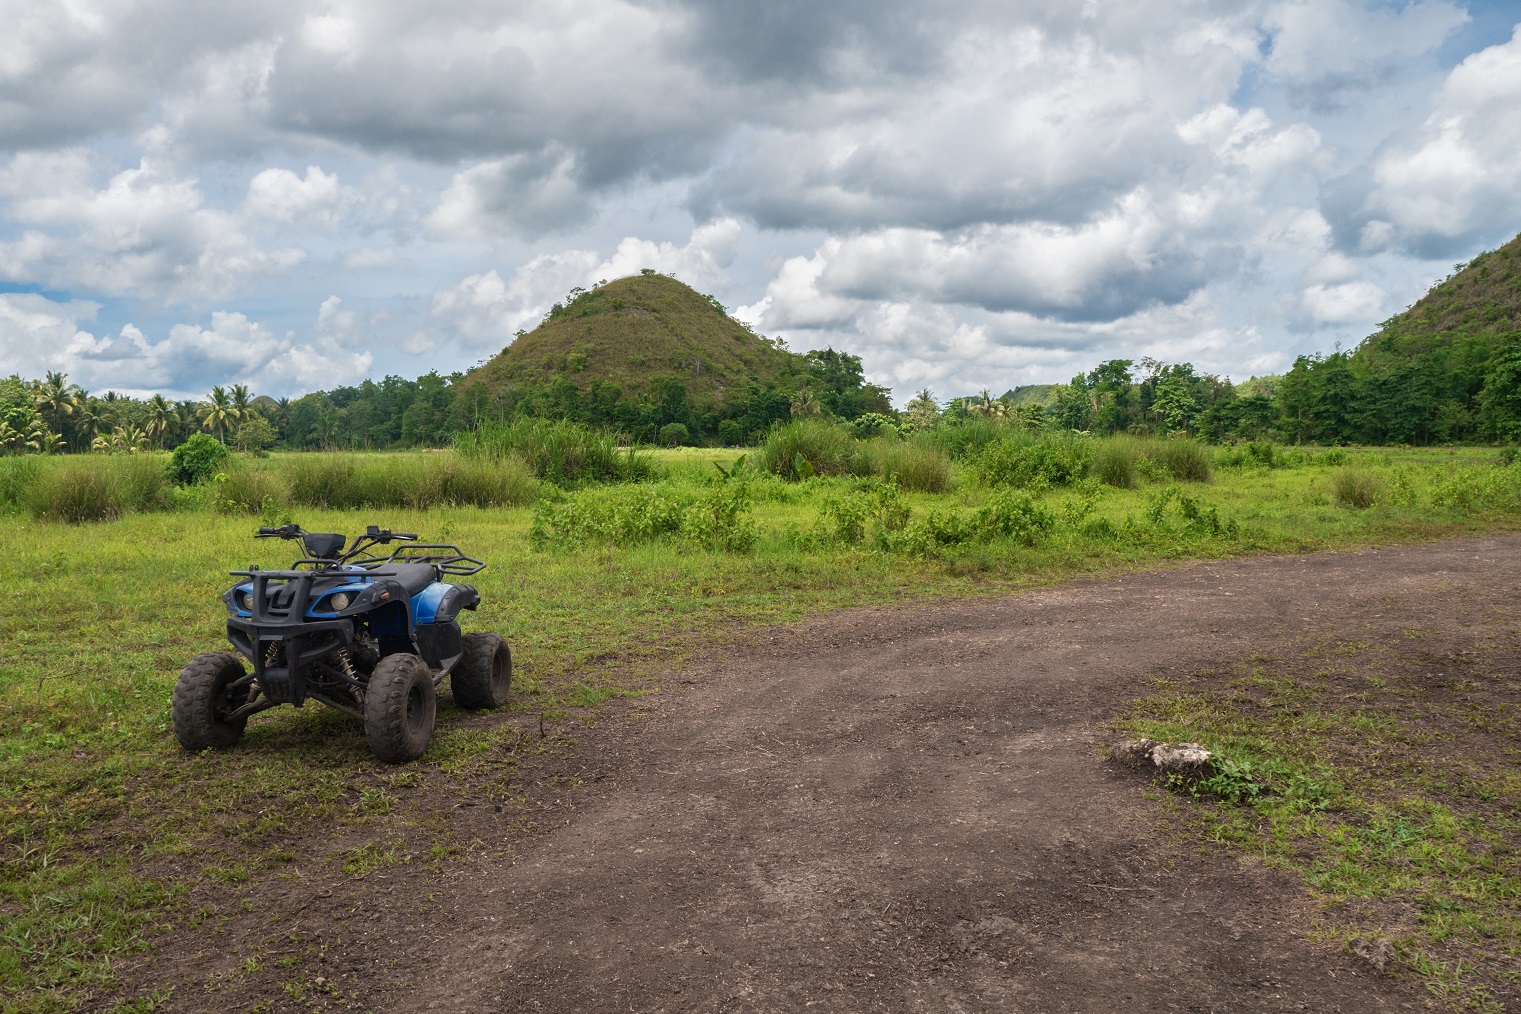 <p>If you’re looking to step your sightseeing up a notch, get closer to the hills with an exciting ATV ride through the trails that weave in between them. You can choose from wide range of guided tours or book an ATV on your own for a solo adventure.</p>